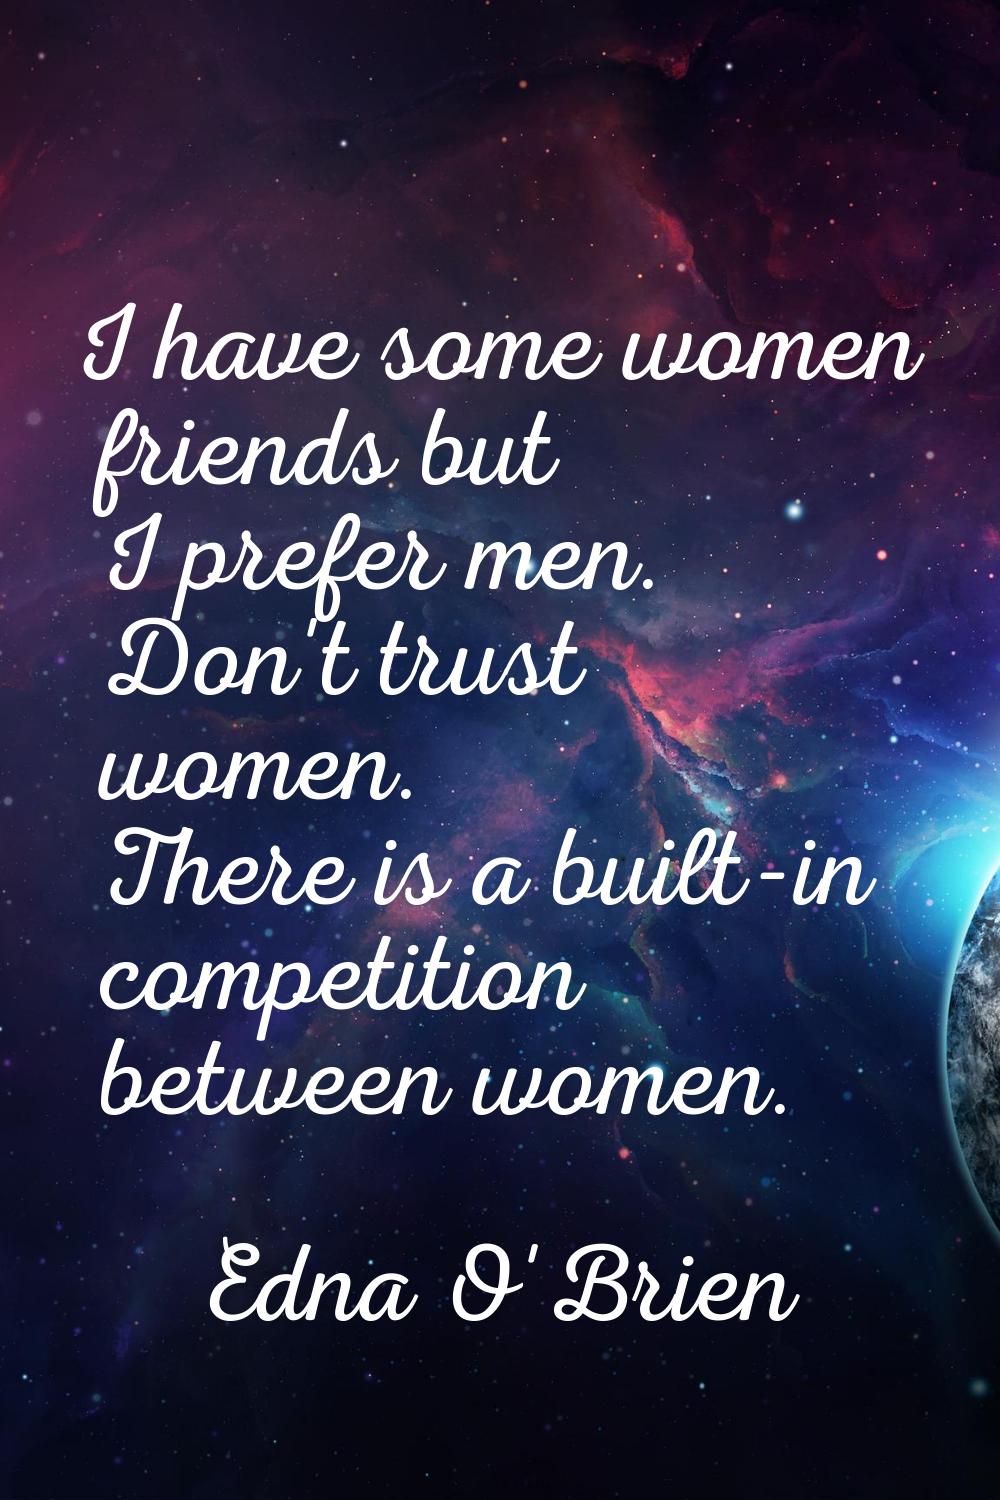 I have some women friends but I prefer men. Don't trust women. There is a built-in competition betw